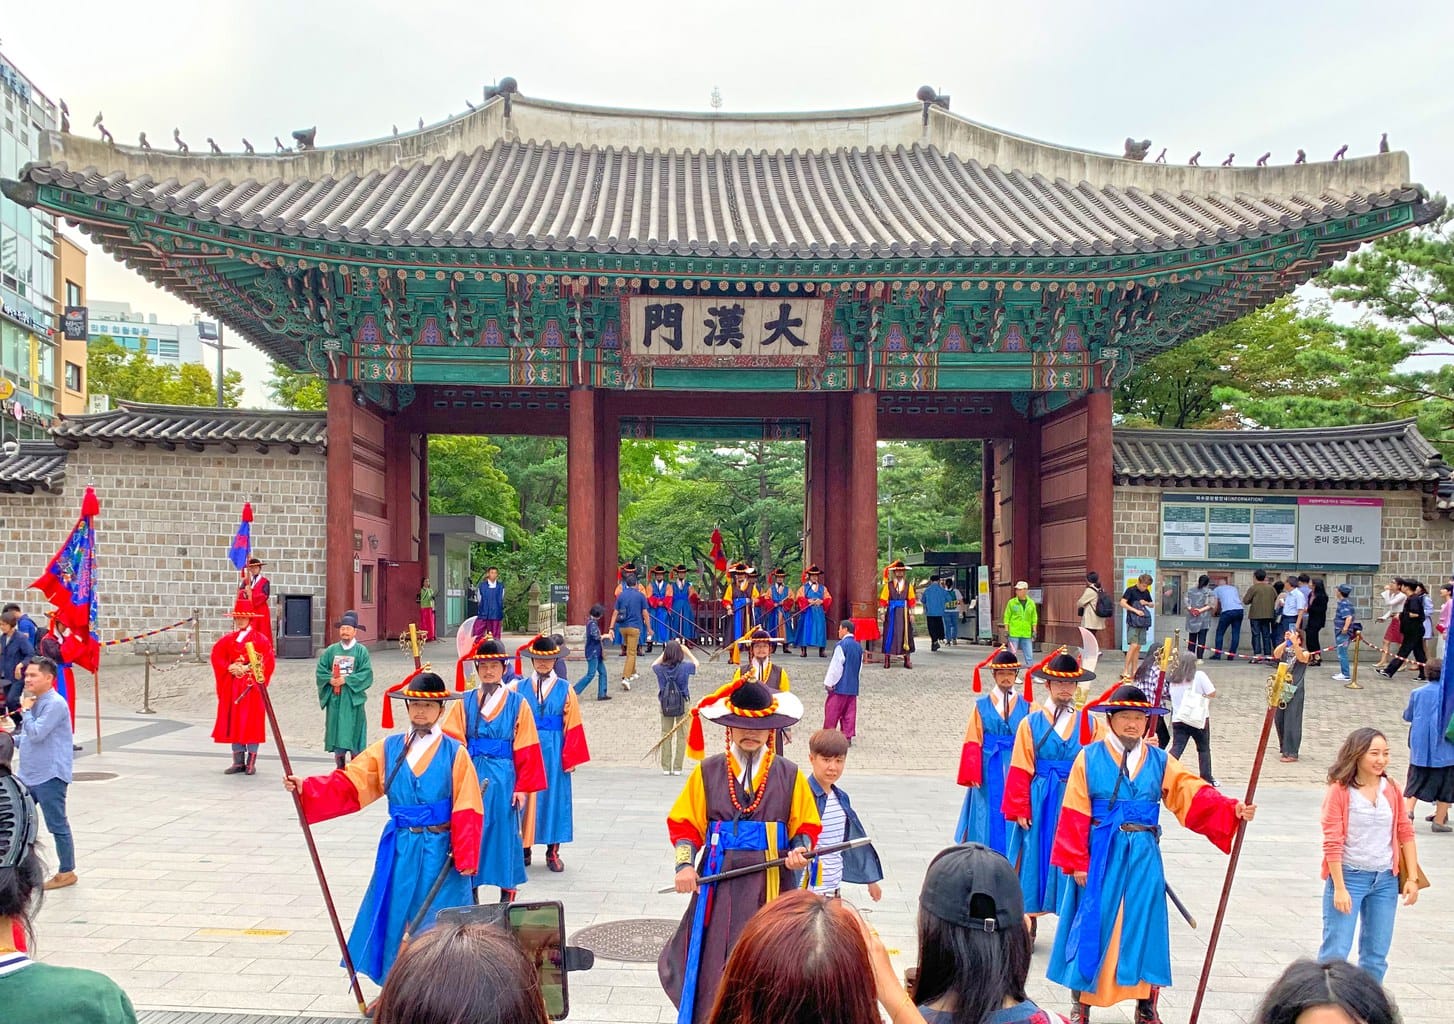 Changing of the guards in front of Deokhongjeon Palace Gate